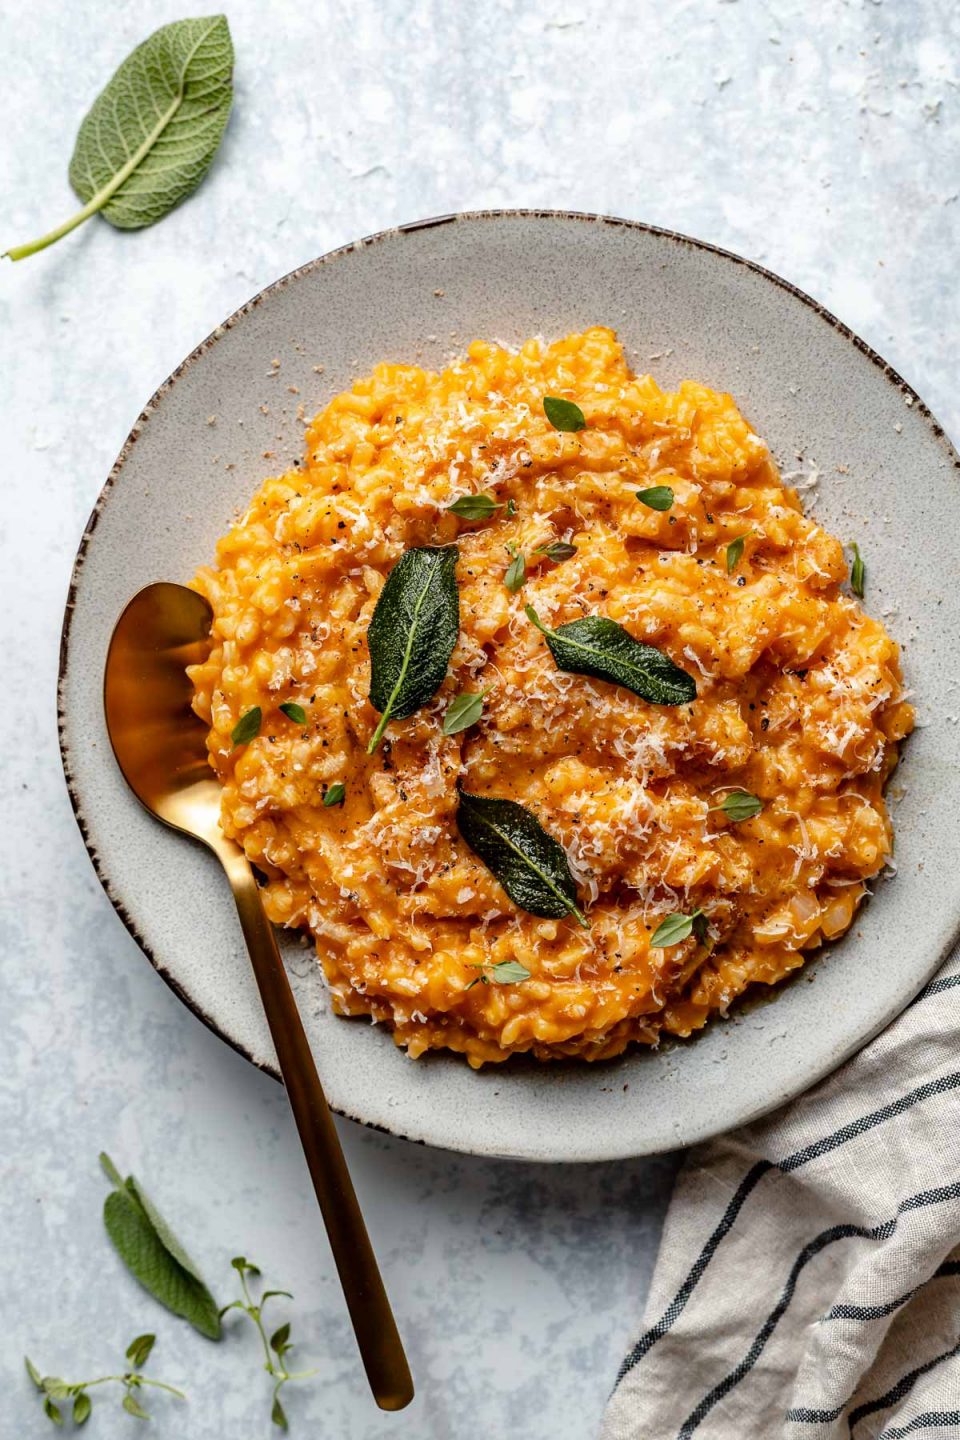 Creamy pumpkin risotto in a large serving dish. The risotto is topped with freshly grated parmesan & crispy fried sage leaves. There is a gold spoon nestled into the risotto. the bowl sits atop a light blue surface, next to a striped linen napkin & fresh sage leaves.